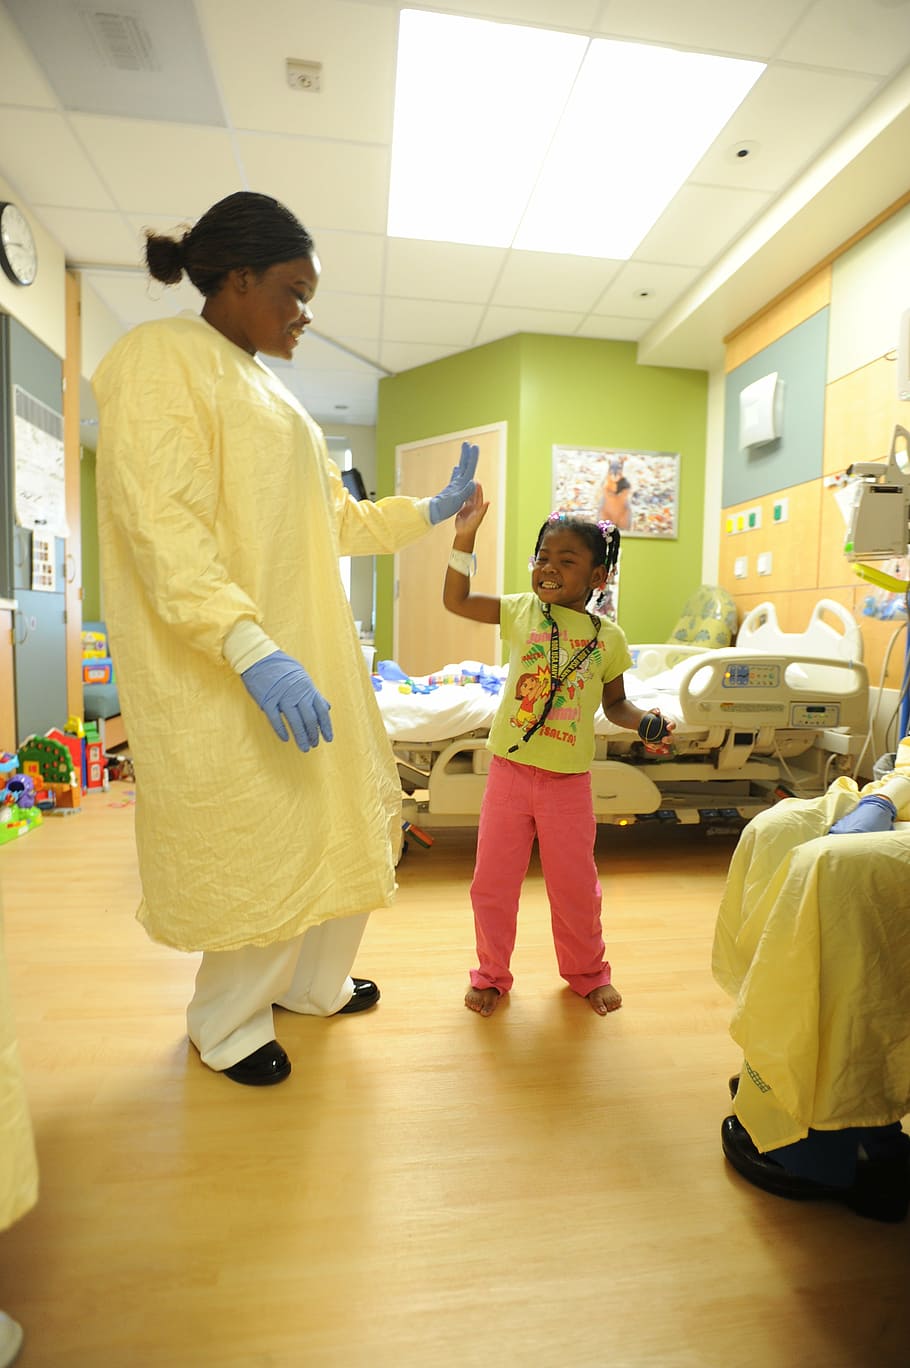 woman clapping to girl, hospital, nurse, patient, child, room